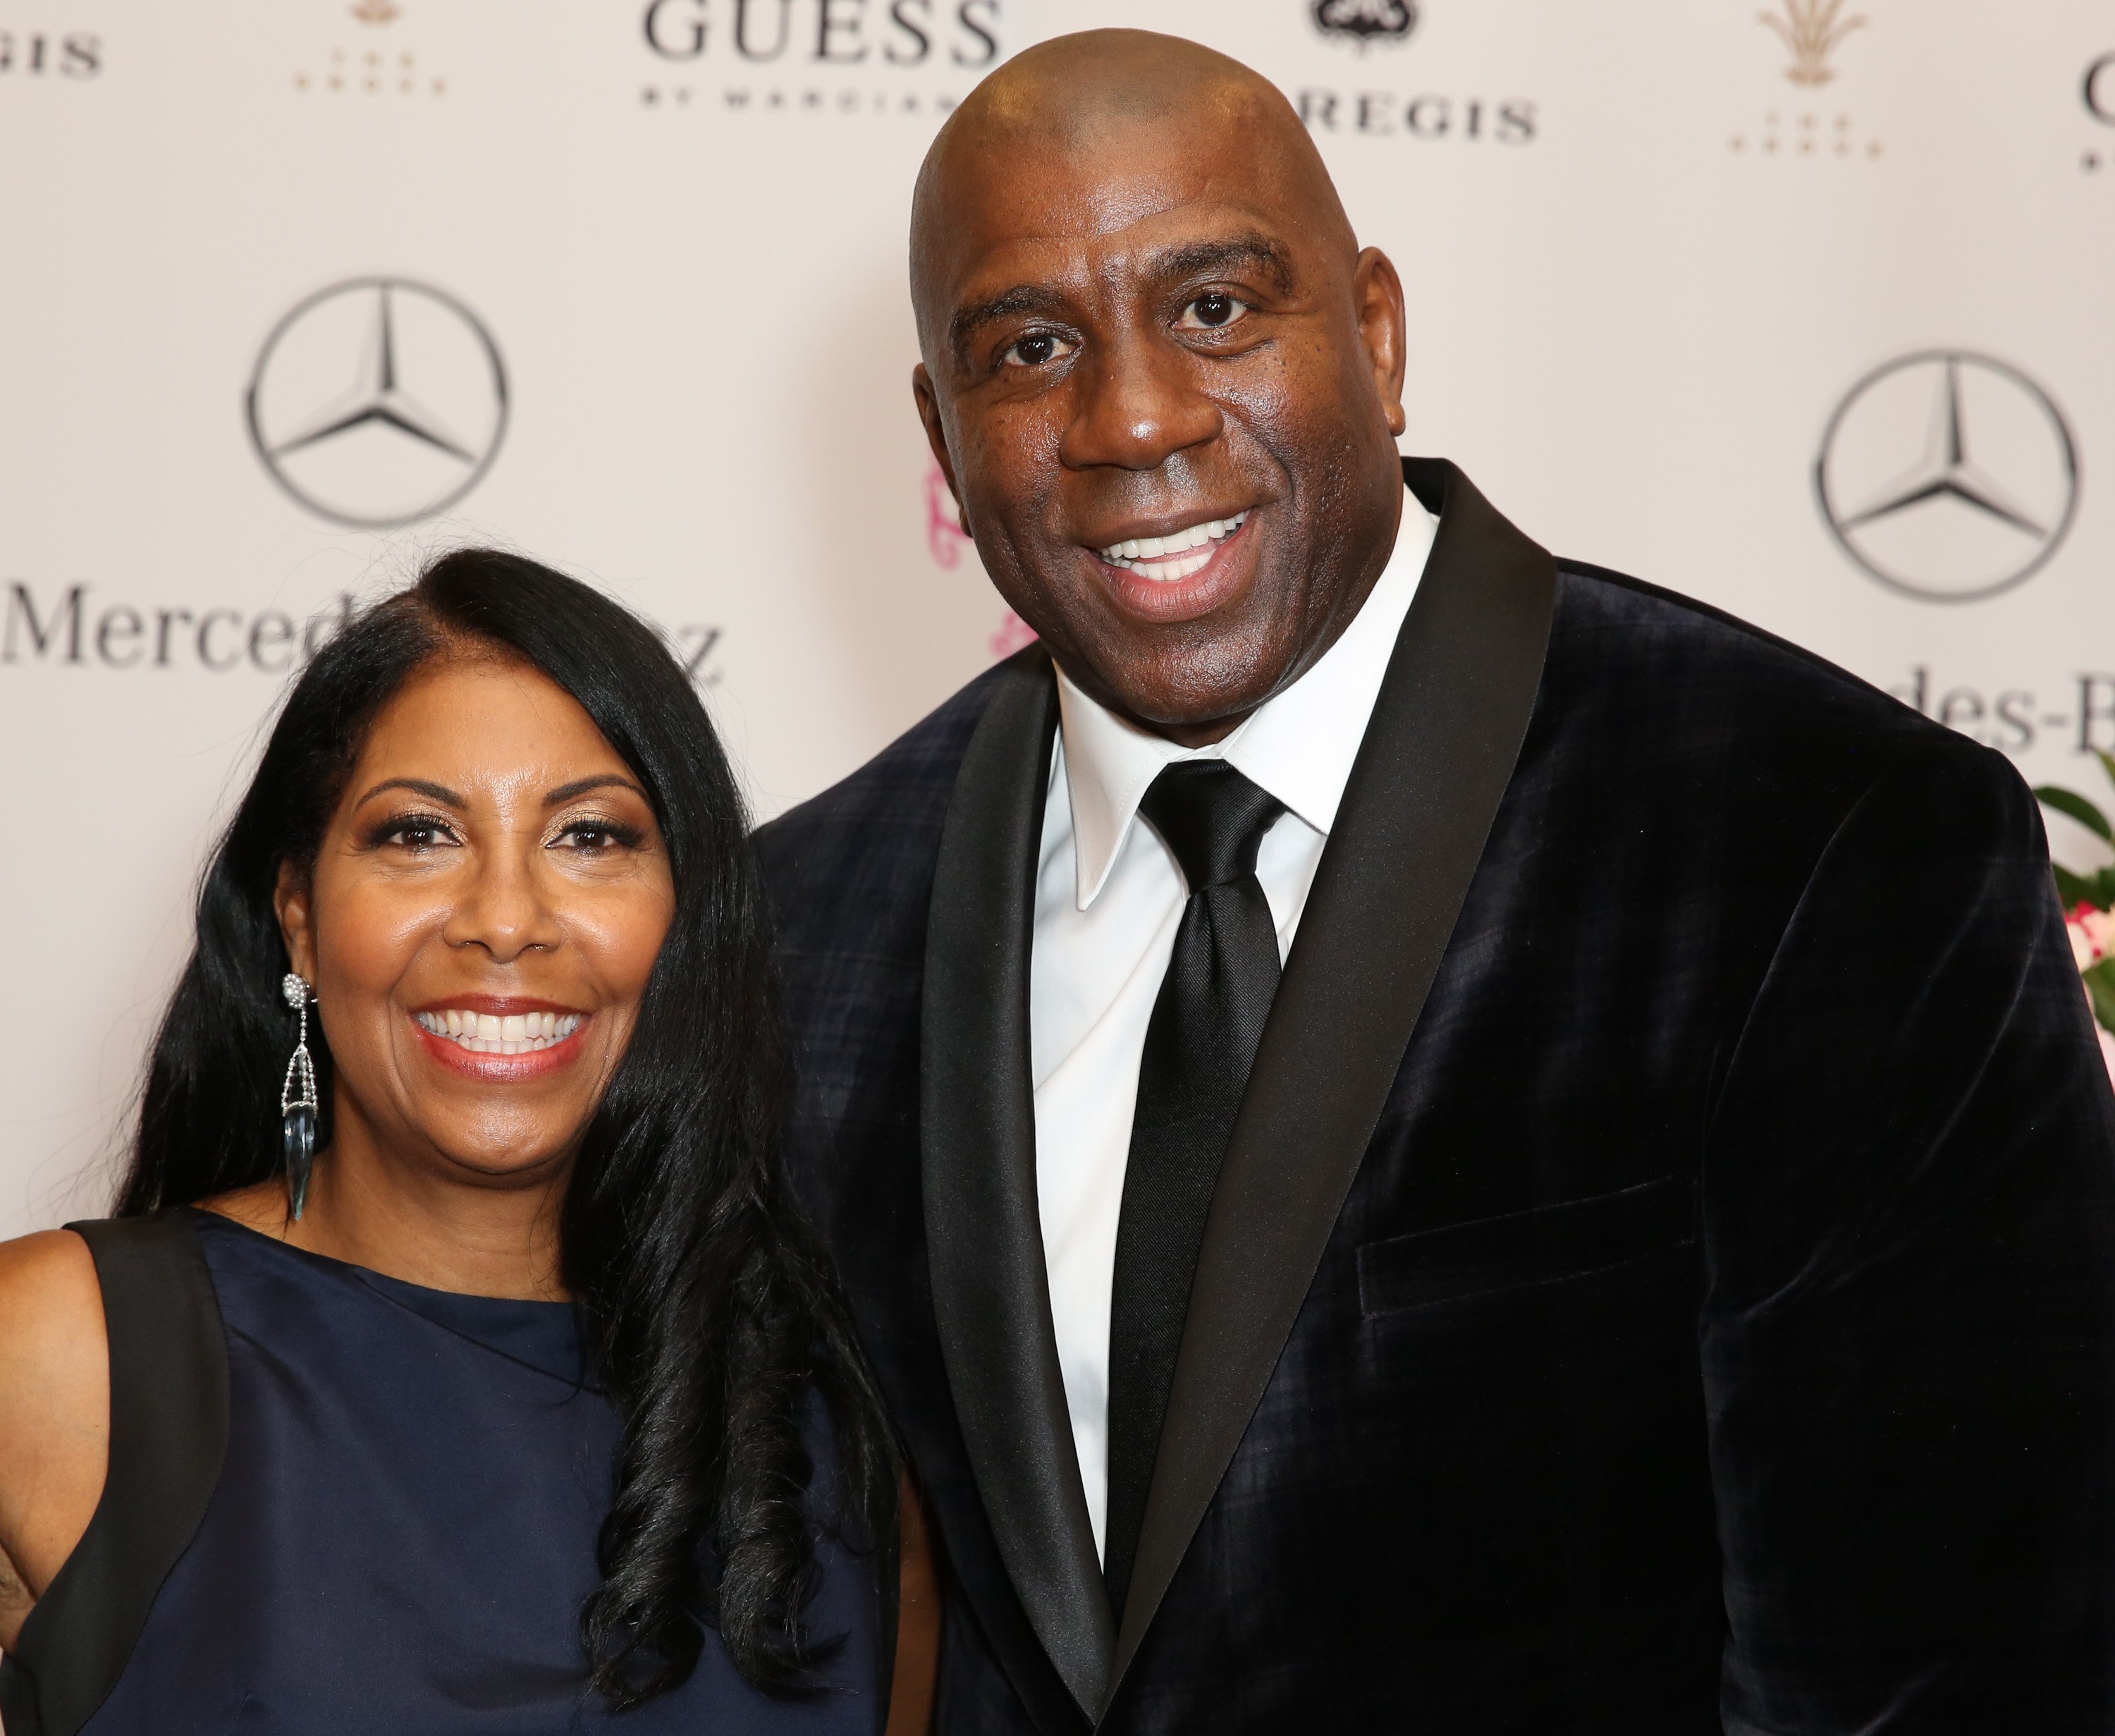 Cookie & Magic Johnson at Mercedes-Benz presents the Carousel of Hope Ball benefitting Barbara Davis Center for Diabetes in Beverly Hills, California on Oct. 11, 2014 | Photo: Getty Images